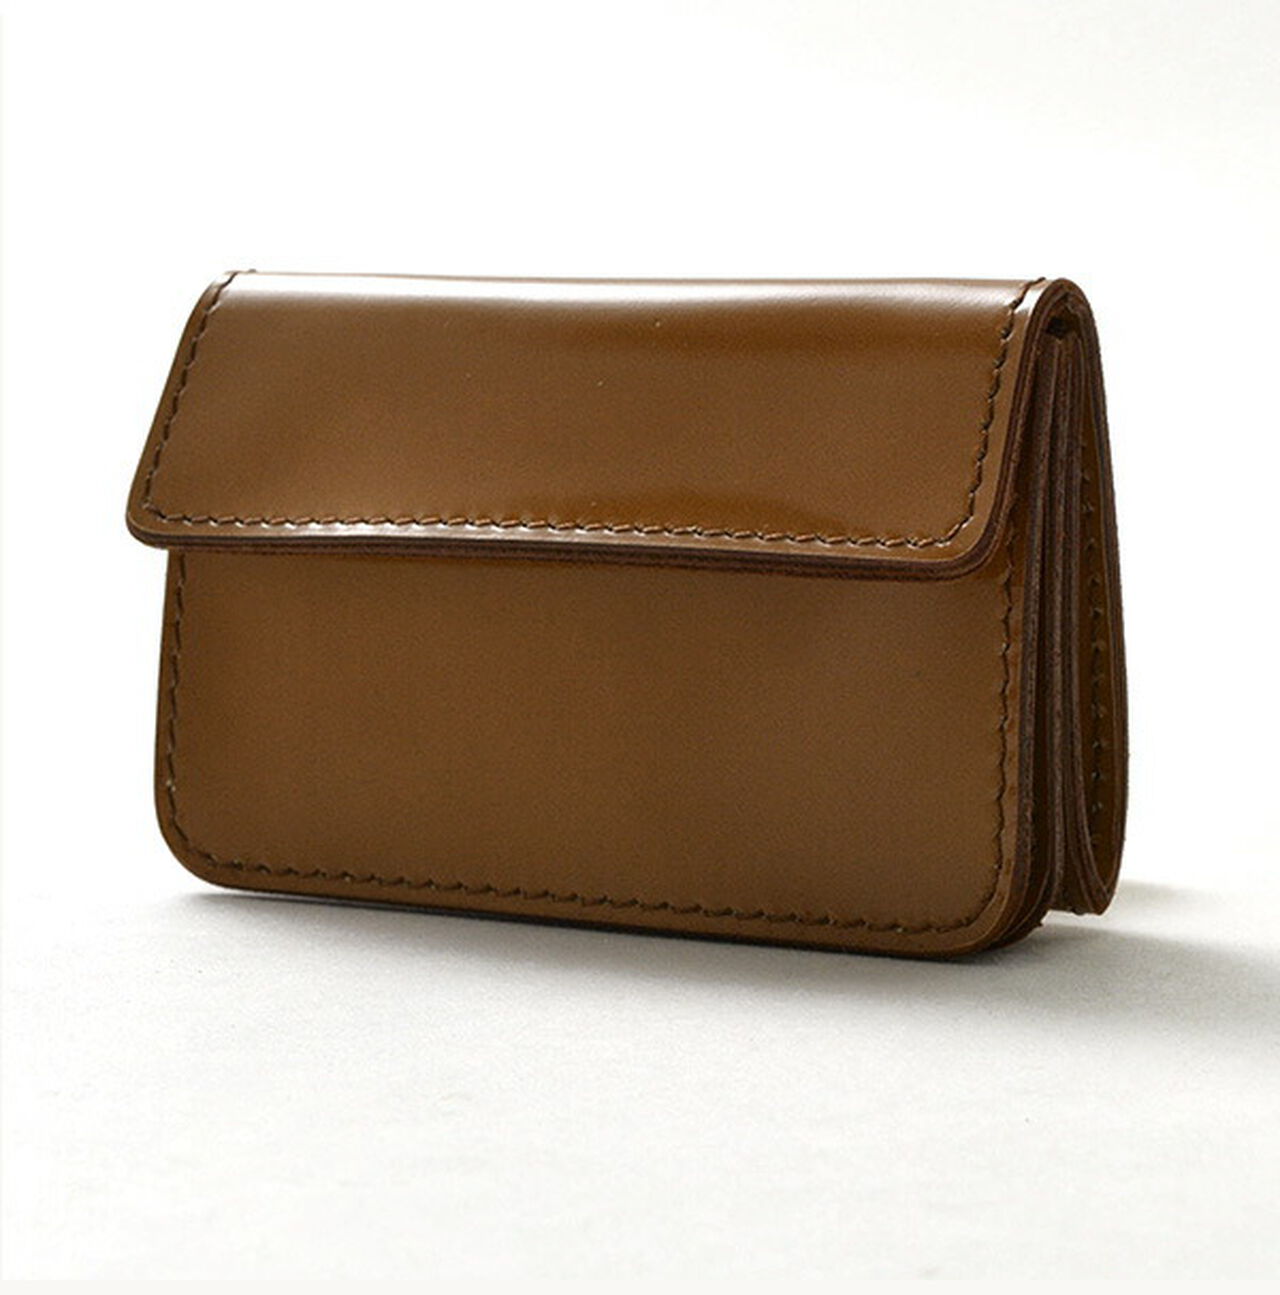 Bellows Compact Wallet,Brown, large image number 0